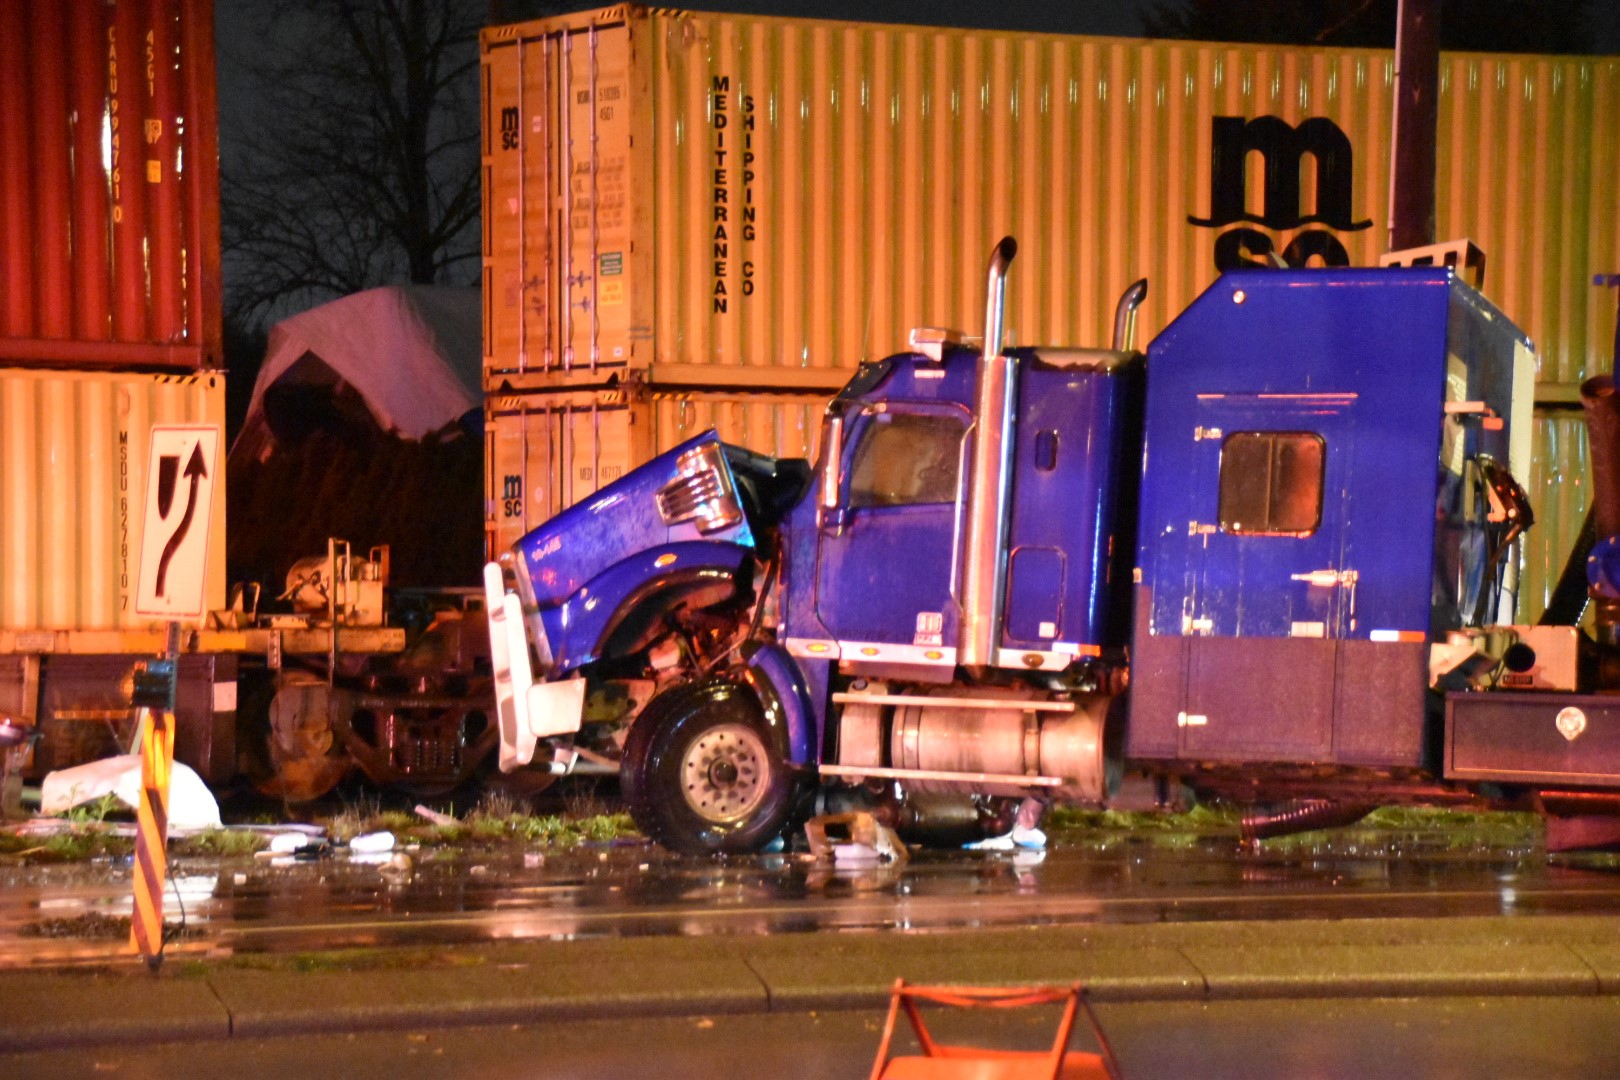 One person sent to hospital after train collides with vacuum truck in Langley, B.C.